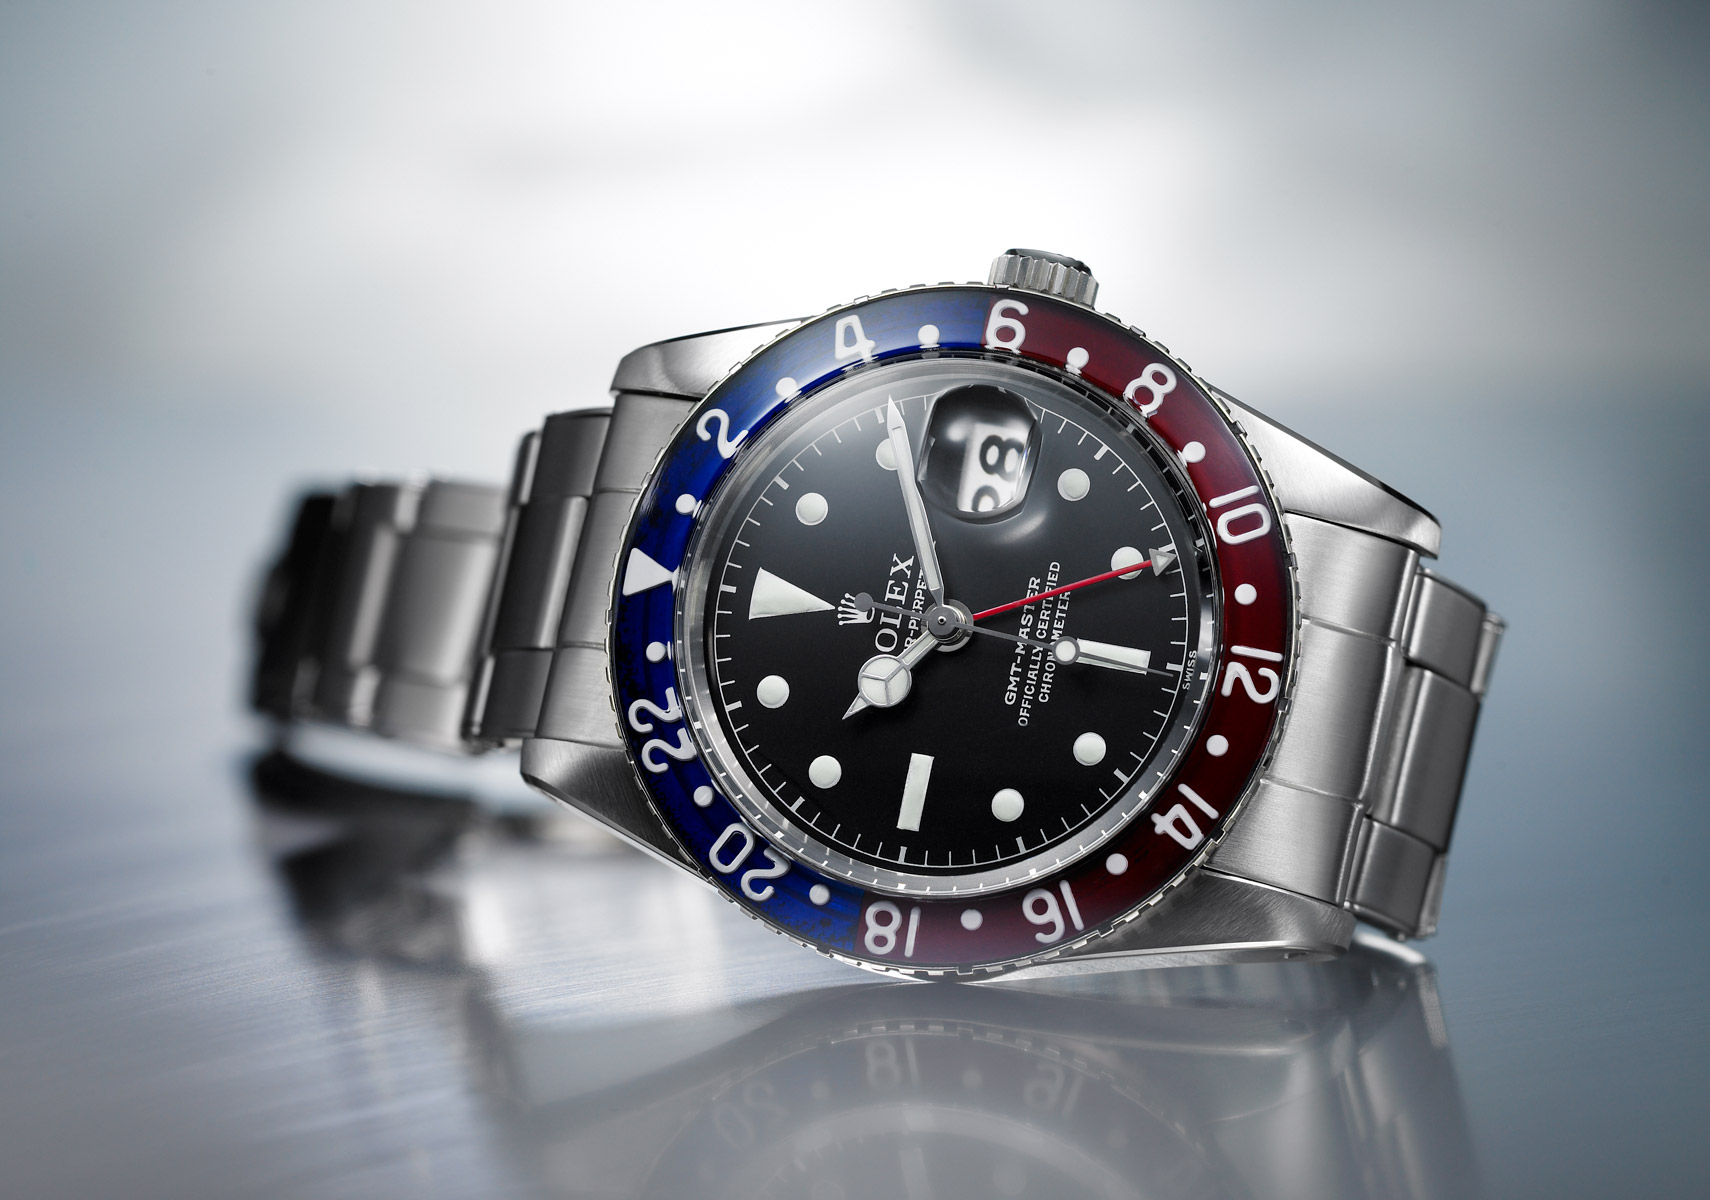 Rolex Oyster Perpetual silver watch with red and blue detail